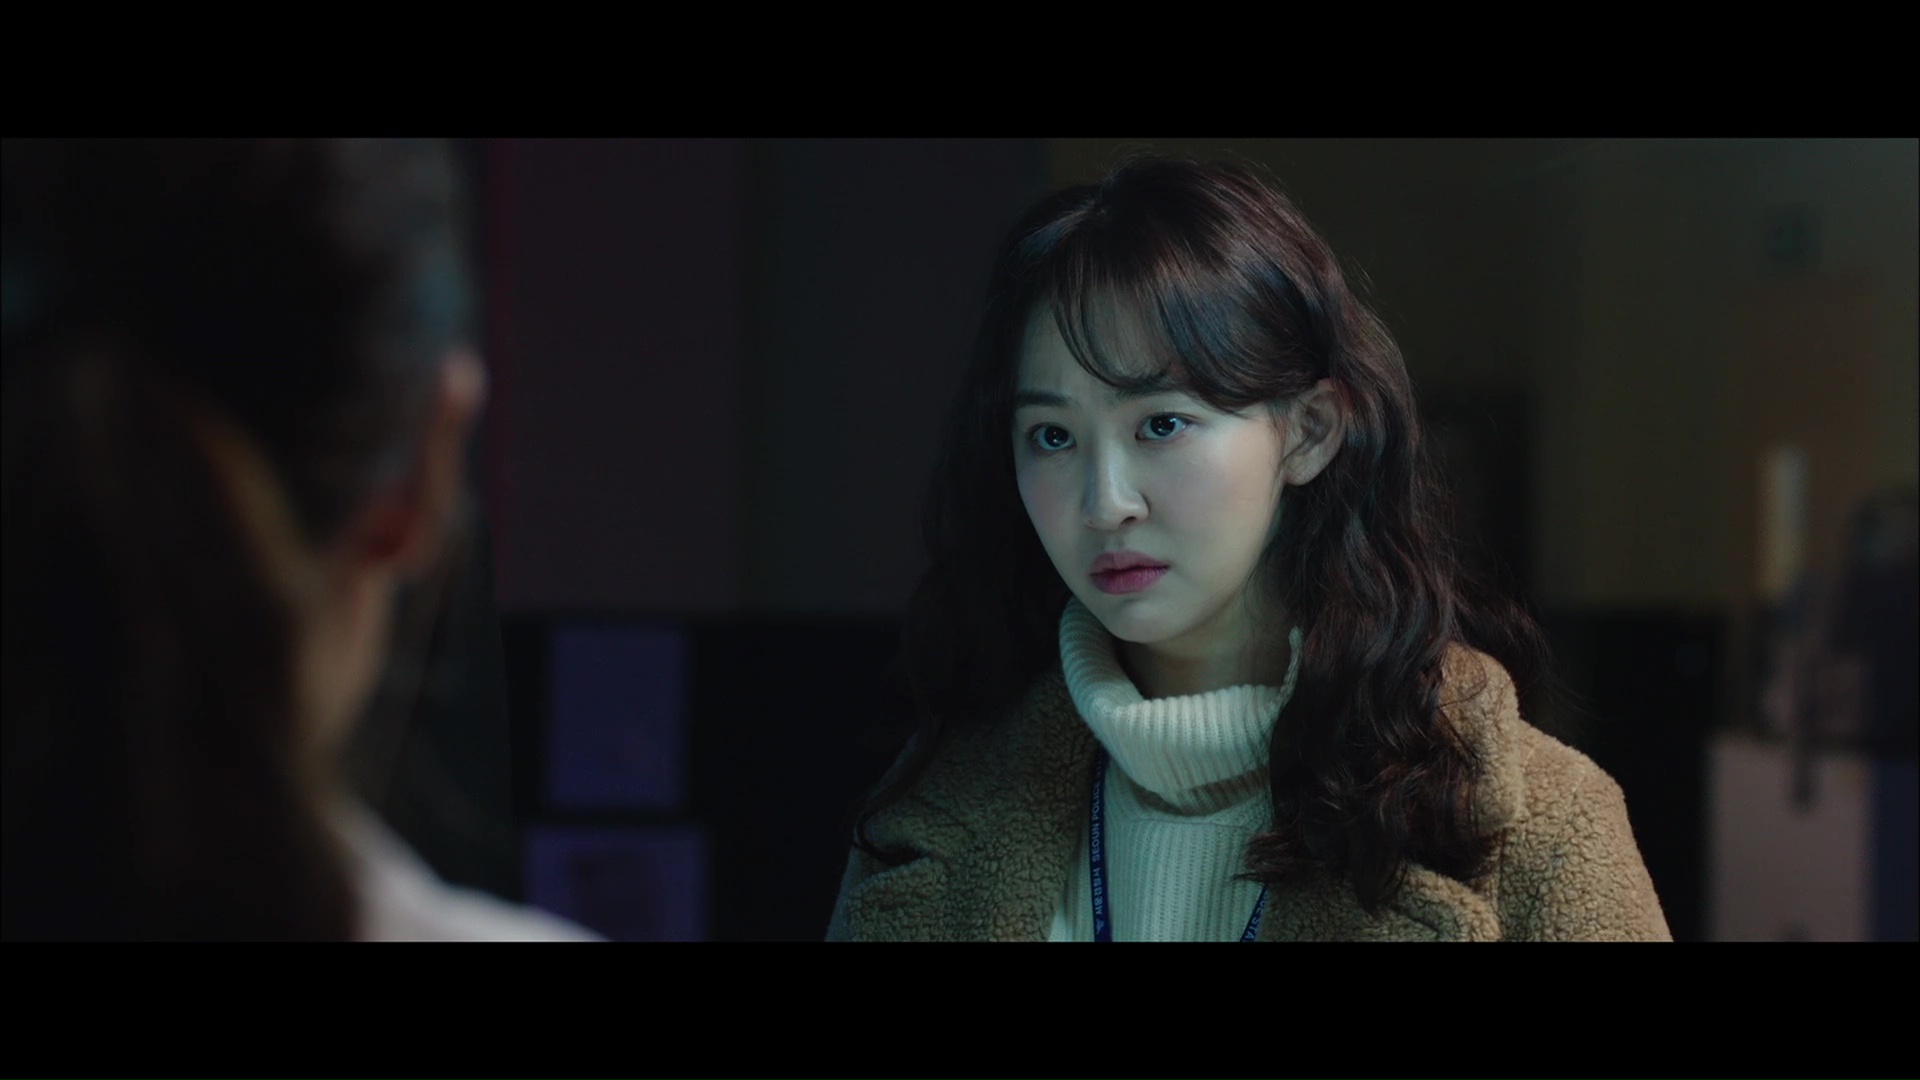 He is Psychometric Review